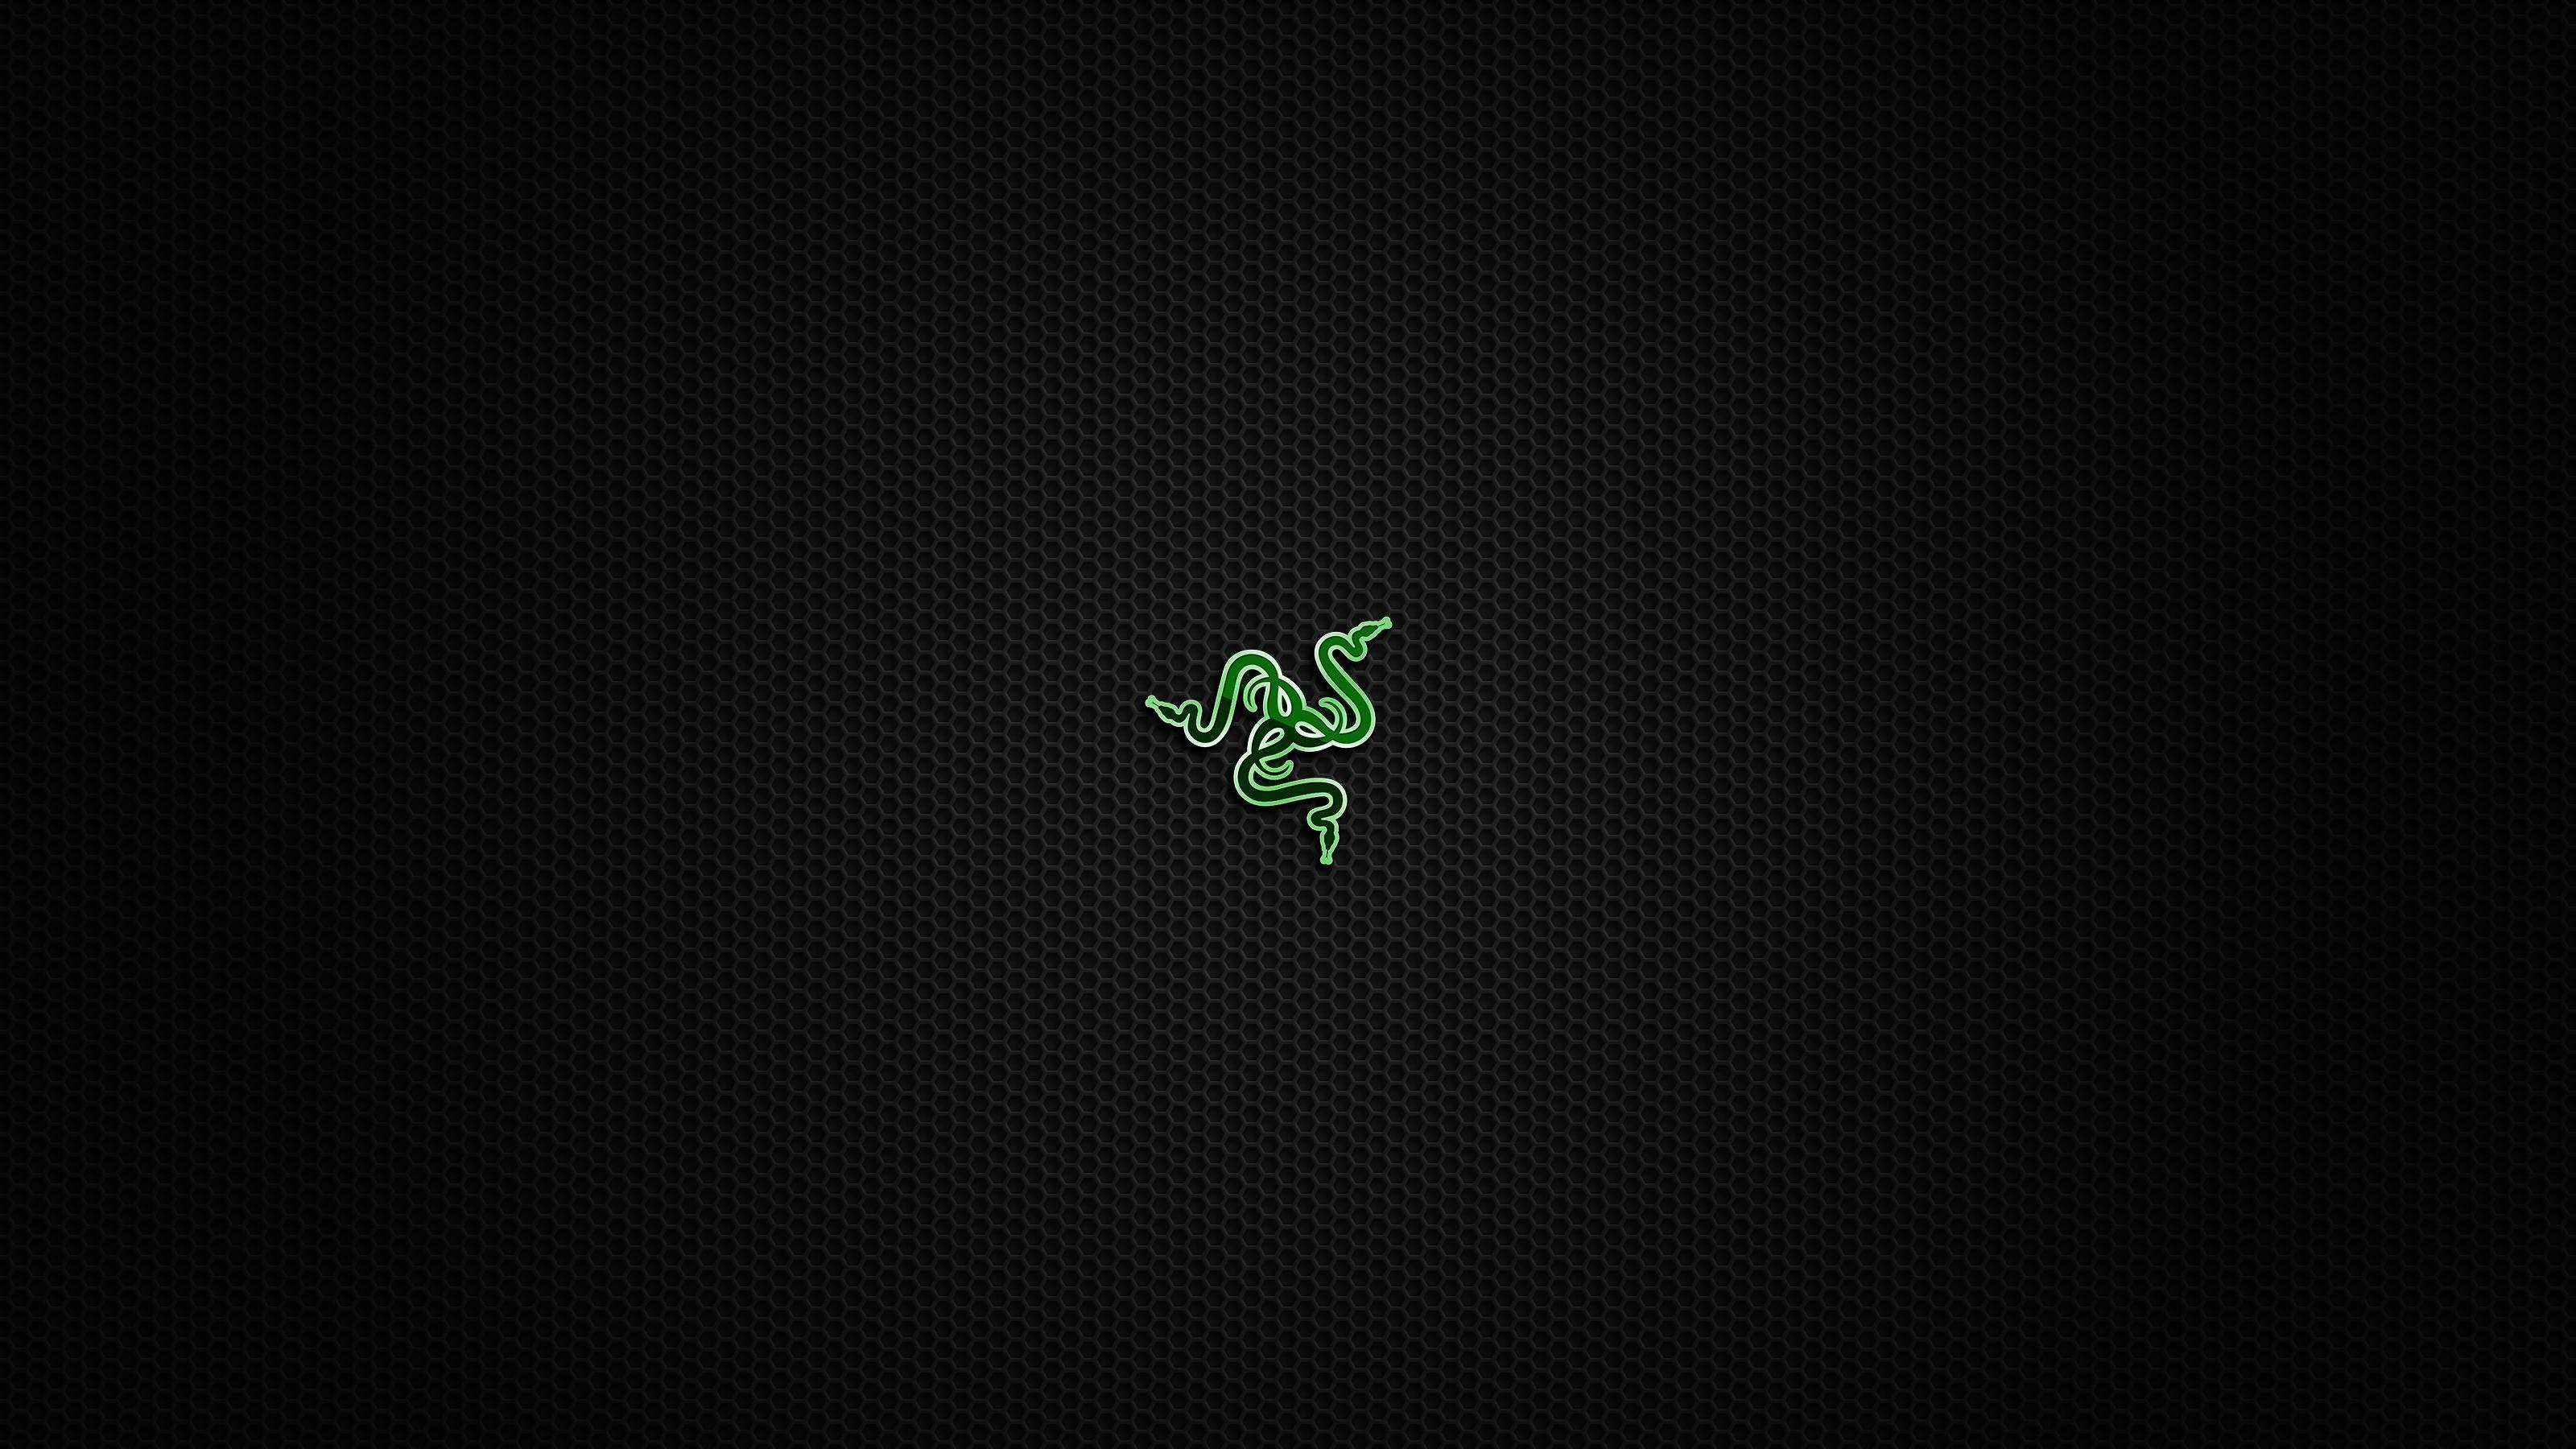 Slightly changed the colour of the Razer Blade factory wallpaper